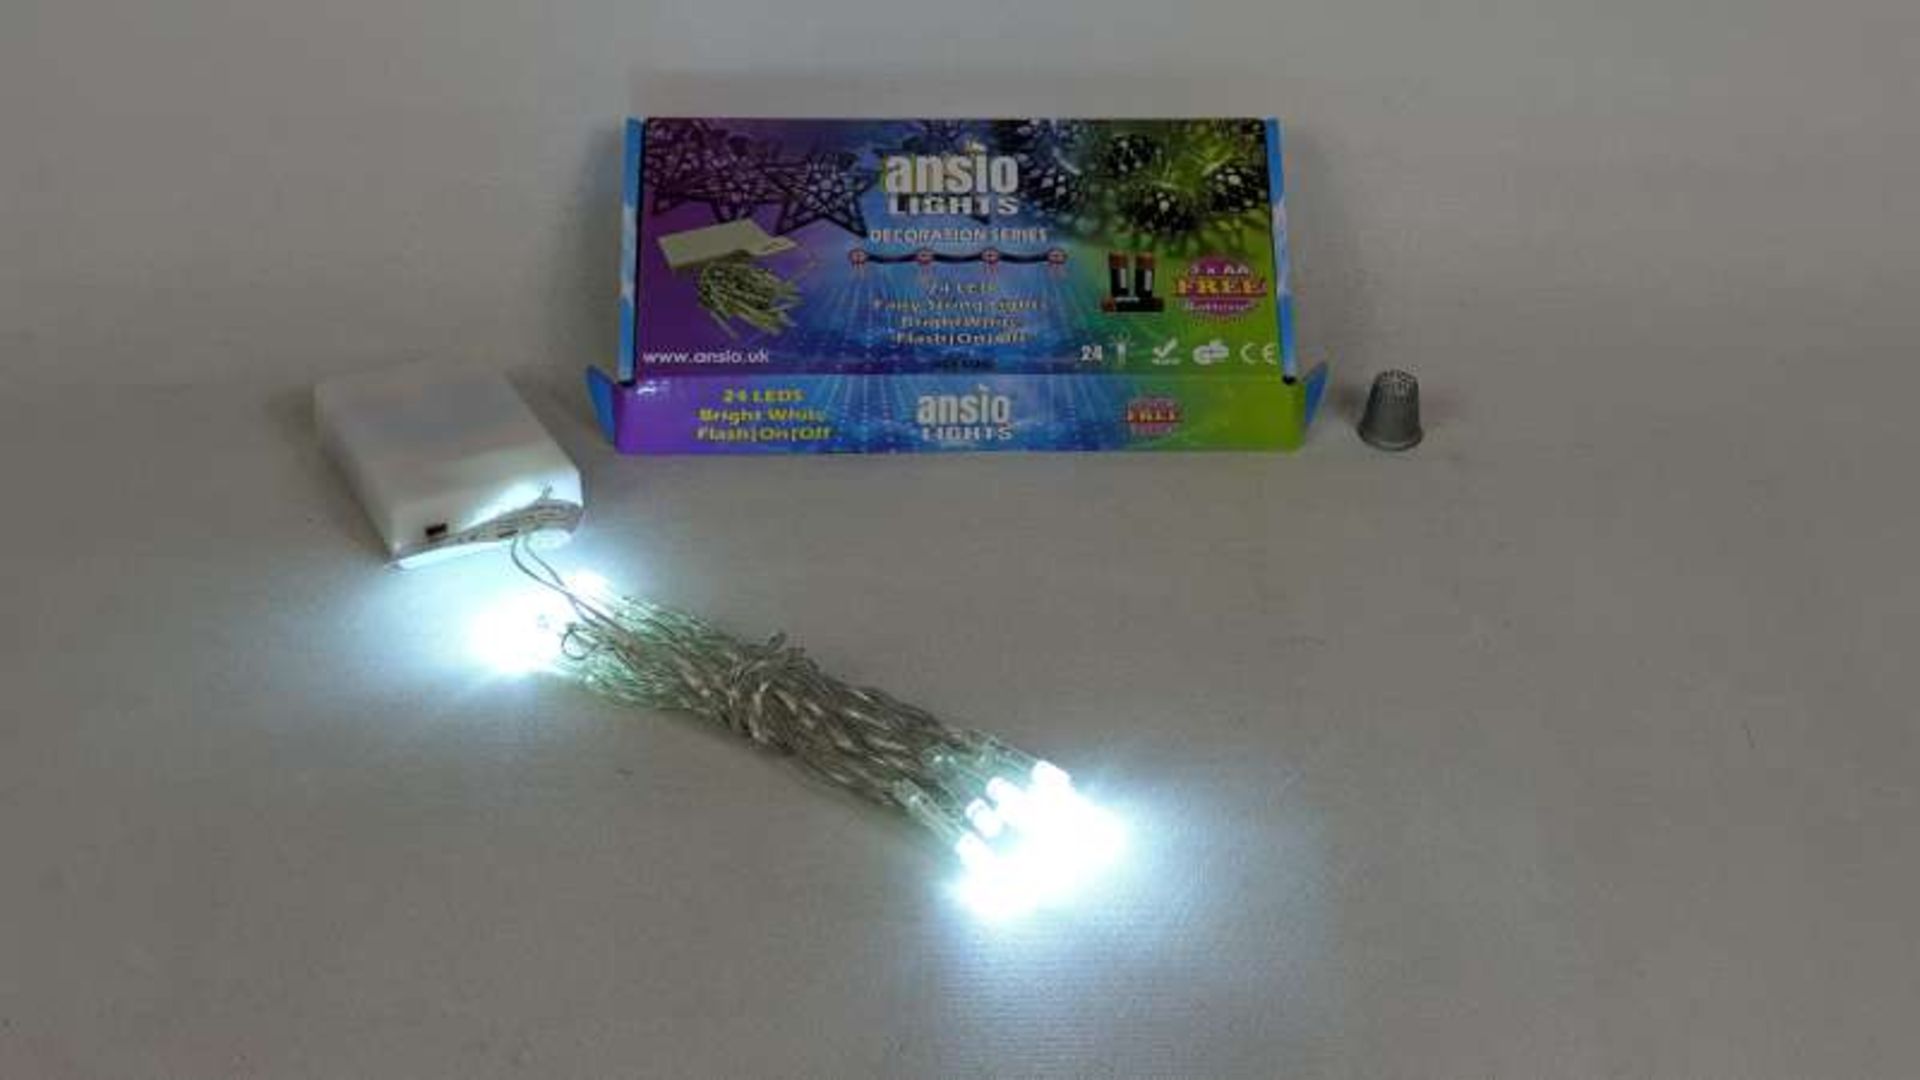 60 X BRAND NEW BOXED 24 LED COOL WHITE CHRISTMAS BATTERY OPERATED STRING FAIRY CHRISTMAS LIGHTS WITH